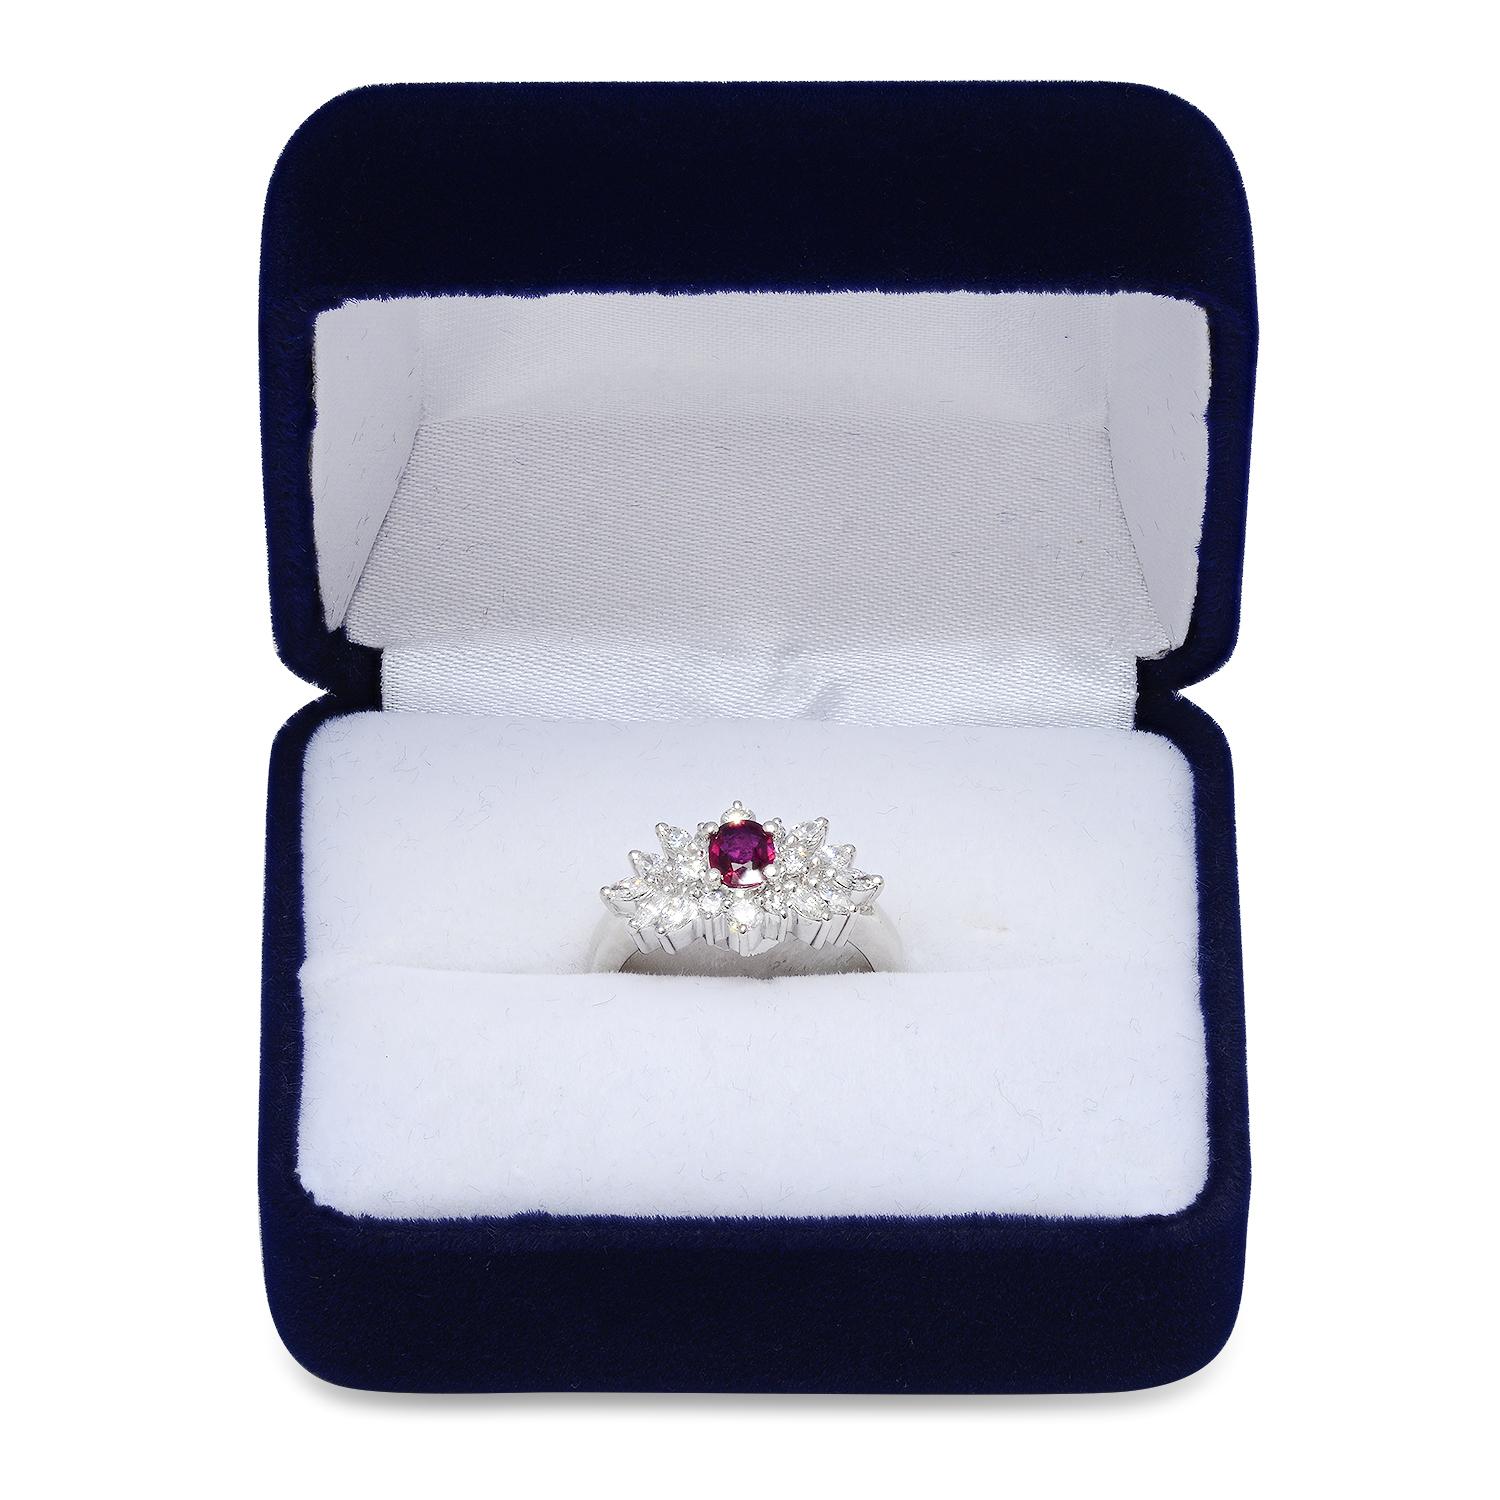 Platinum setting with .47ct Ruby and 0.79ct Diamond Ladies Ring